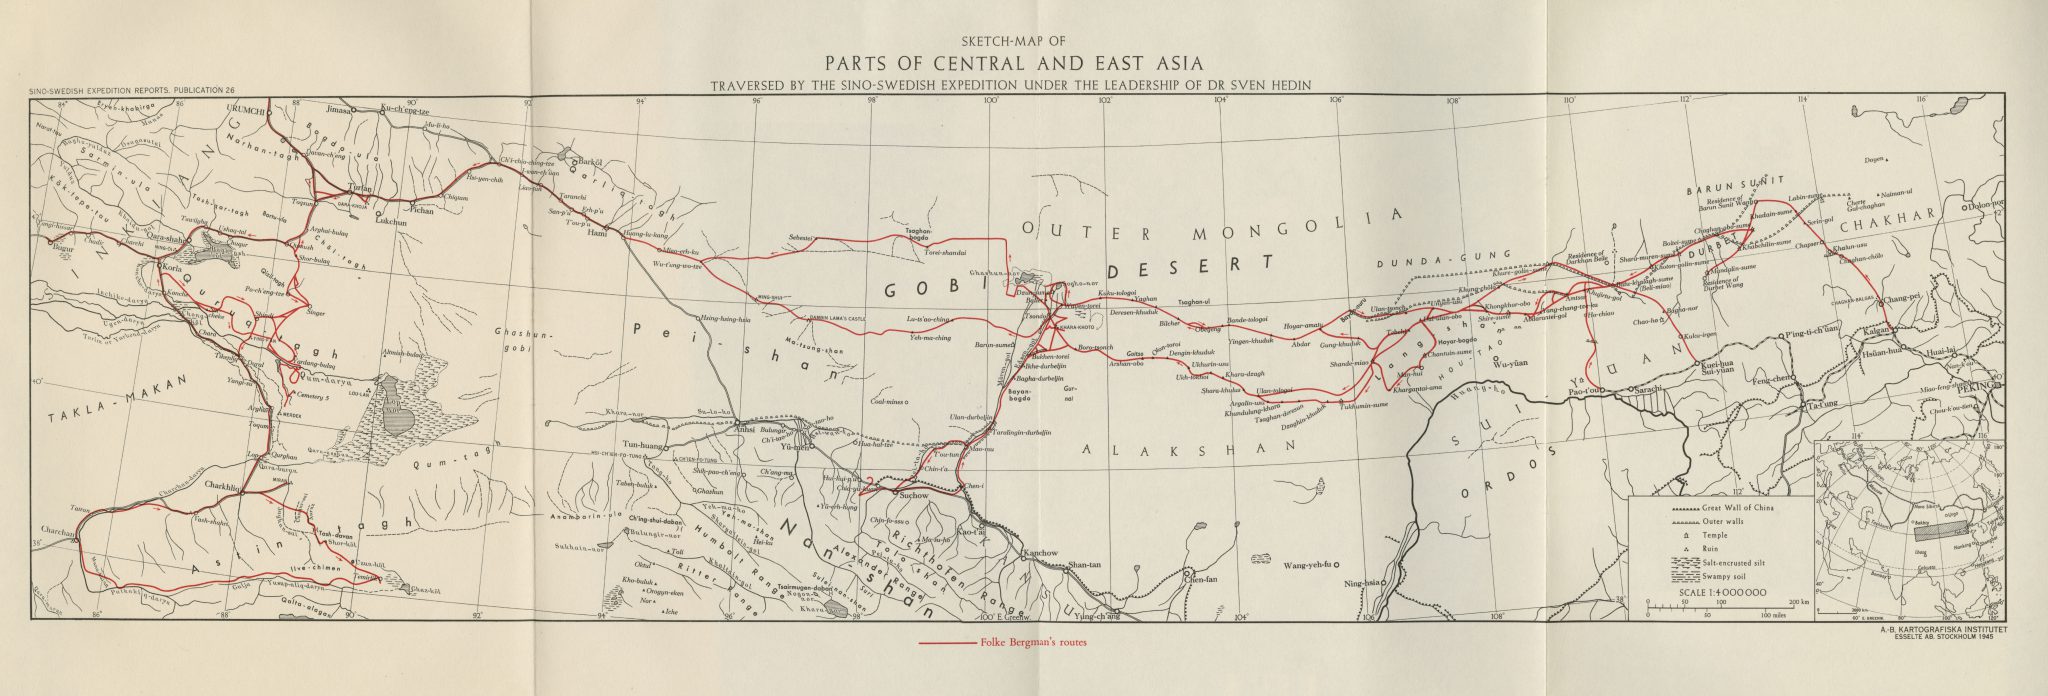 Sketch-Map of Parts of Central Asia and East Asia 1945